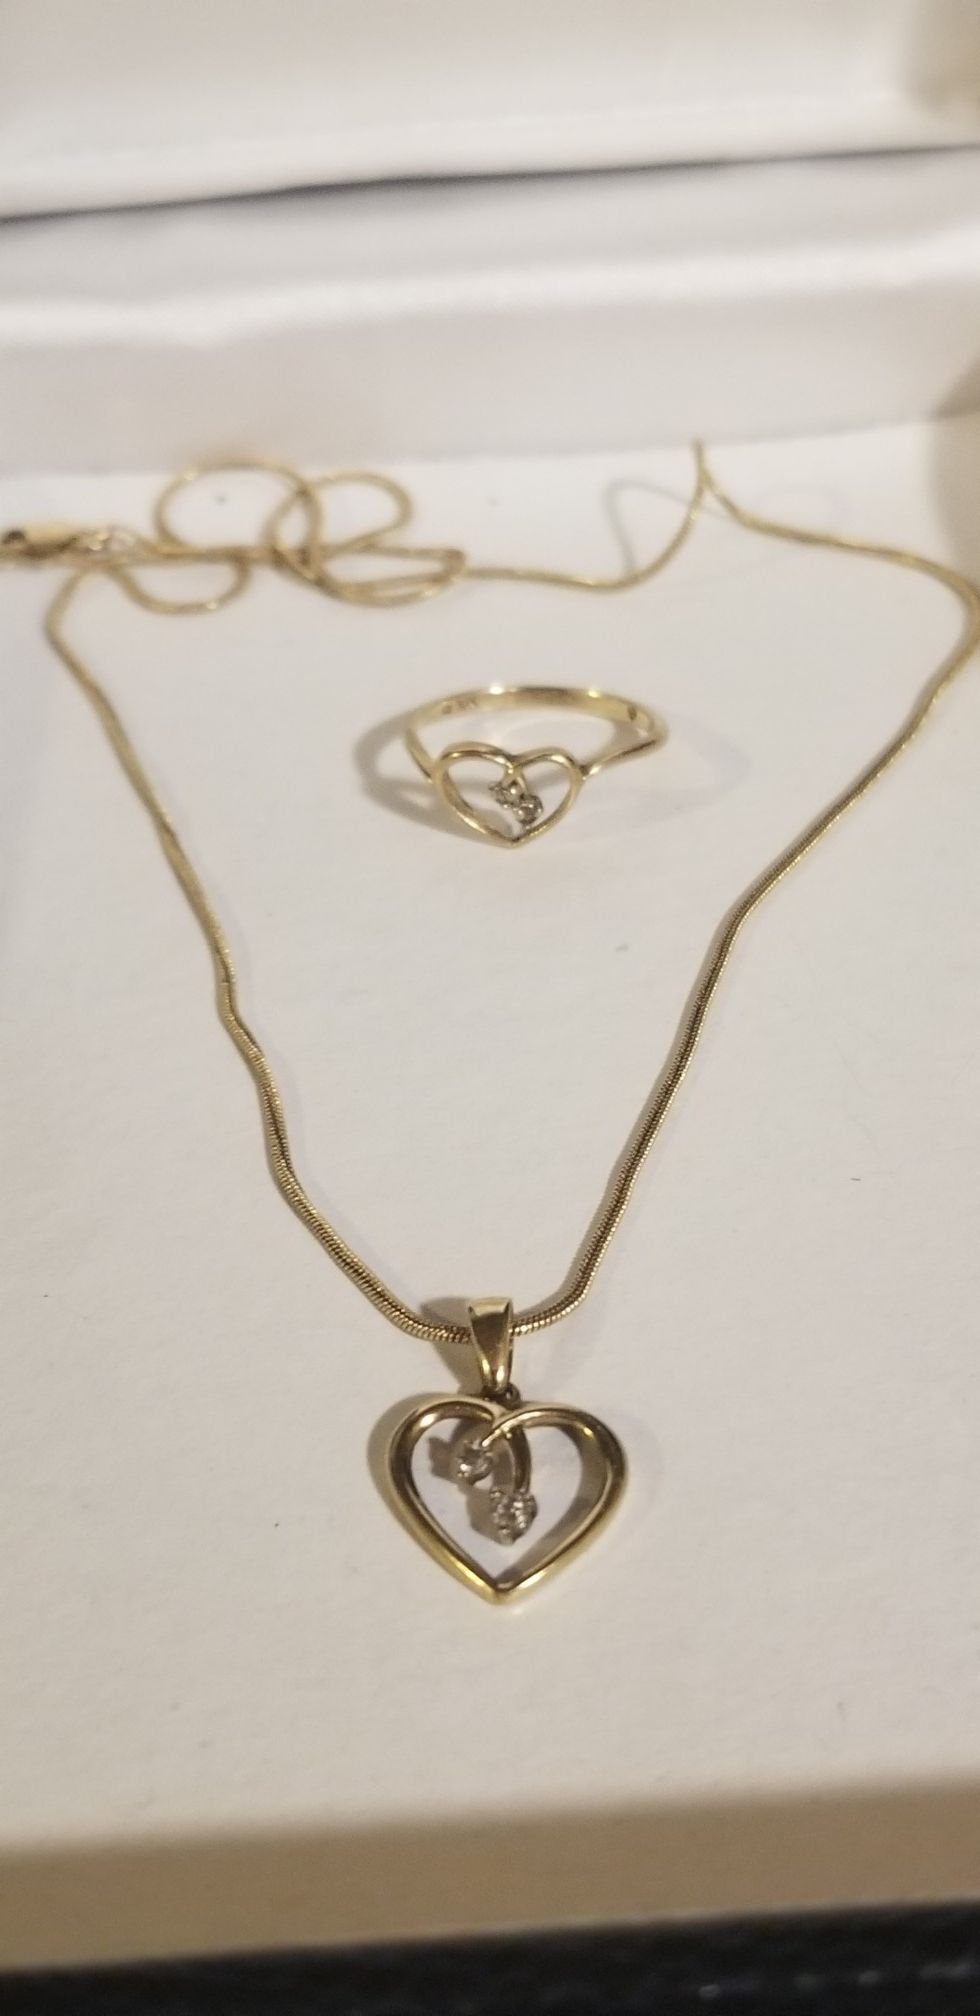 BEAUTIFUL GOLD CHAIN WITH HEART PENDANT WITH MATCHING RING